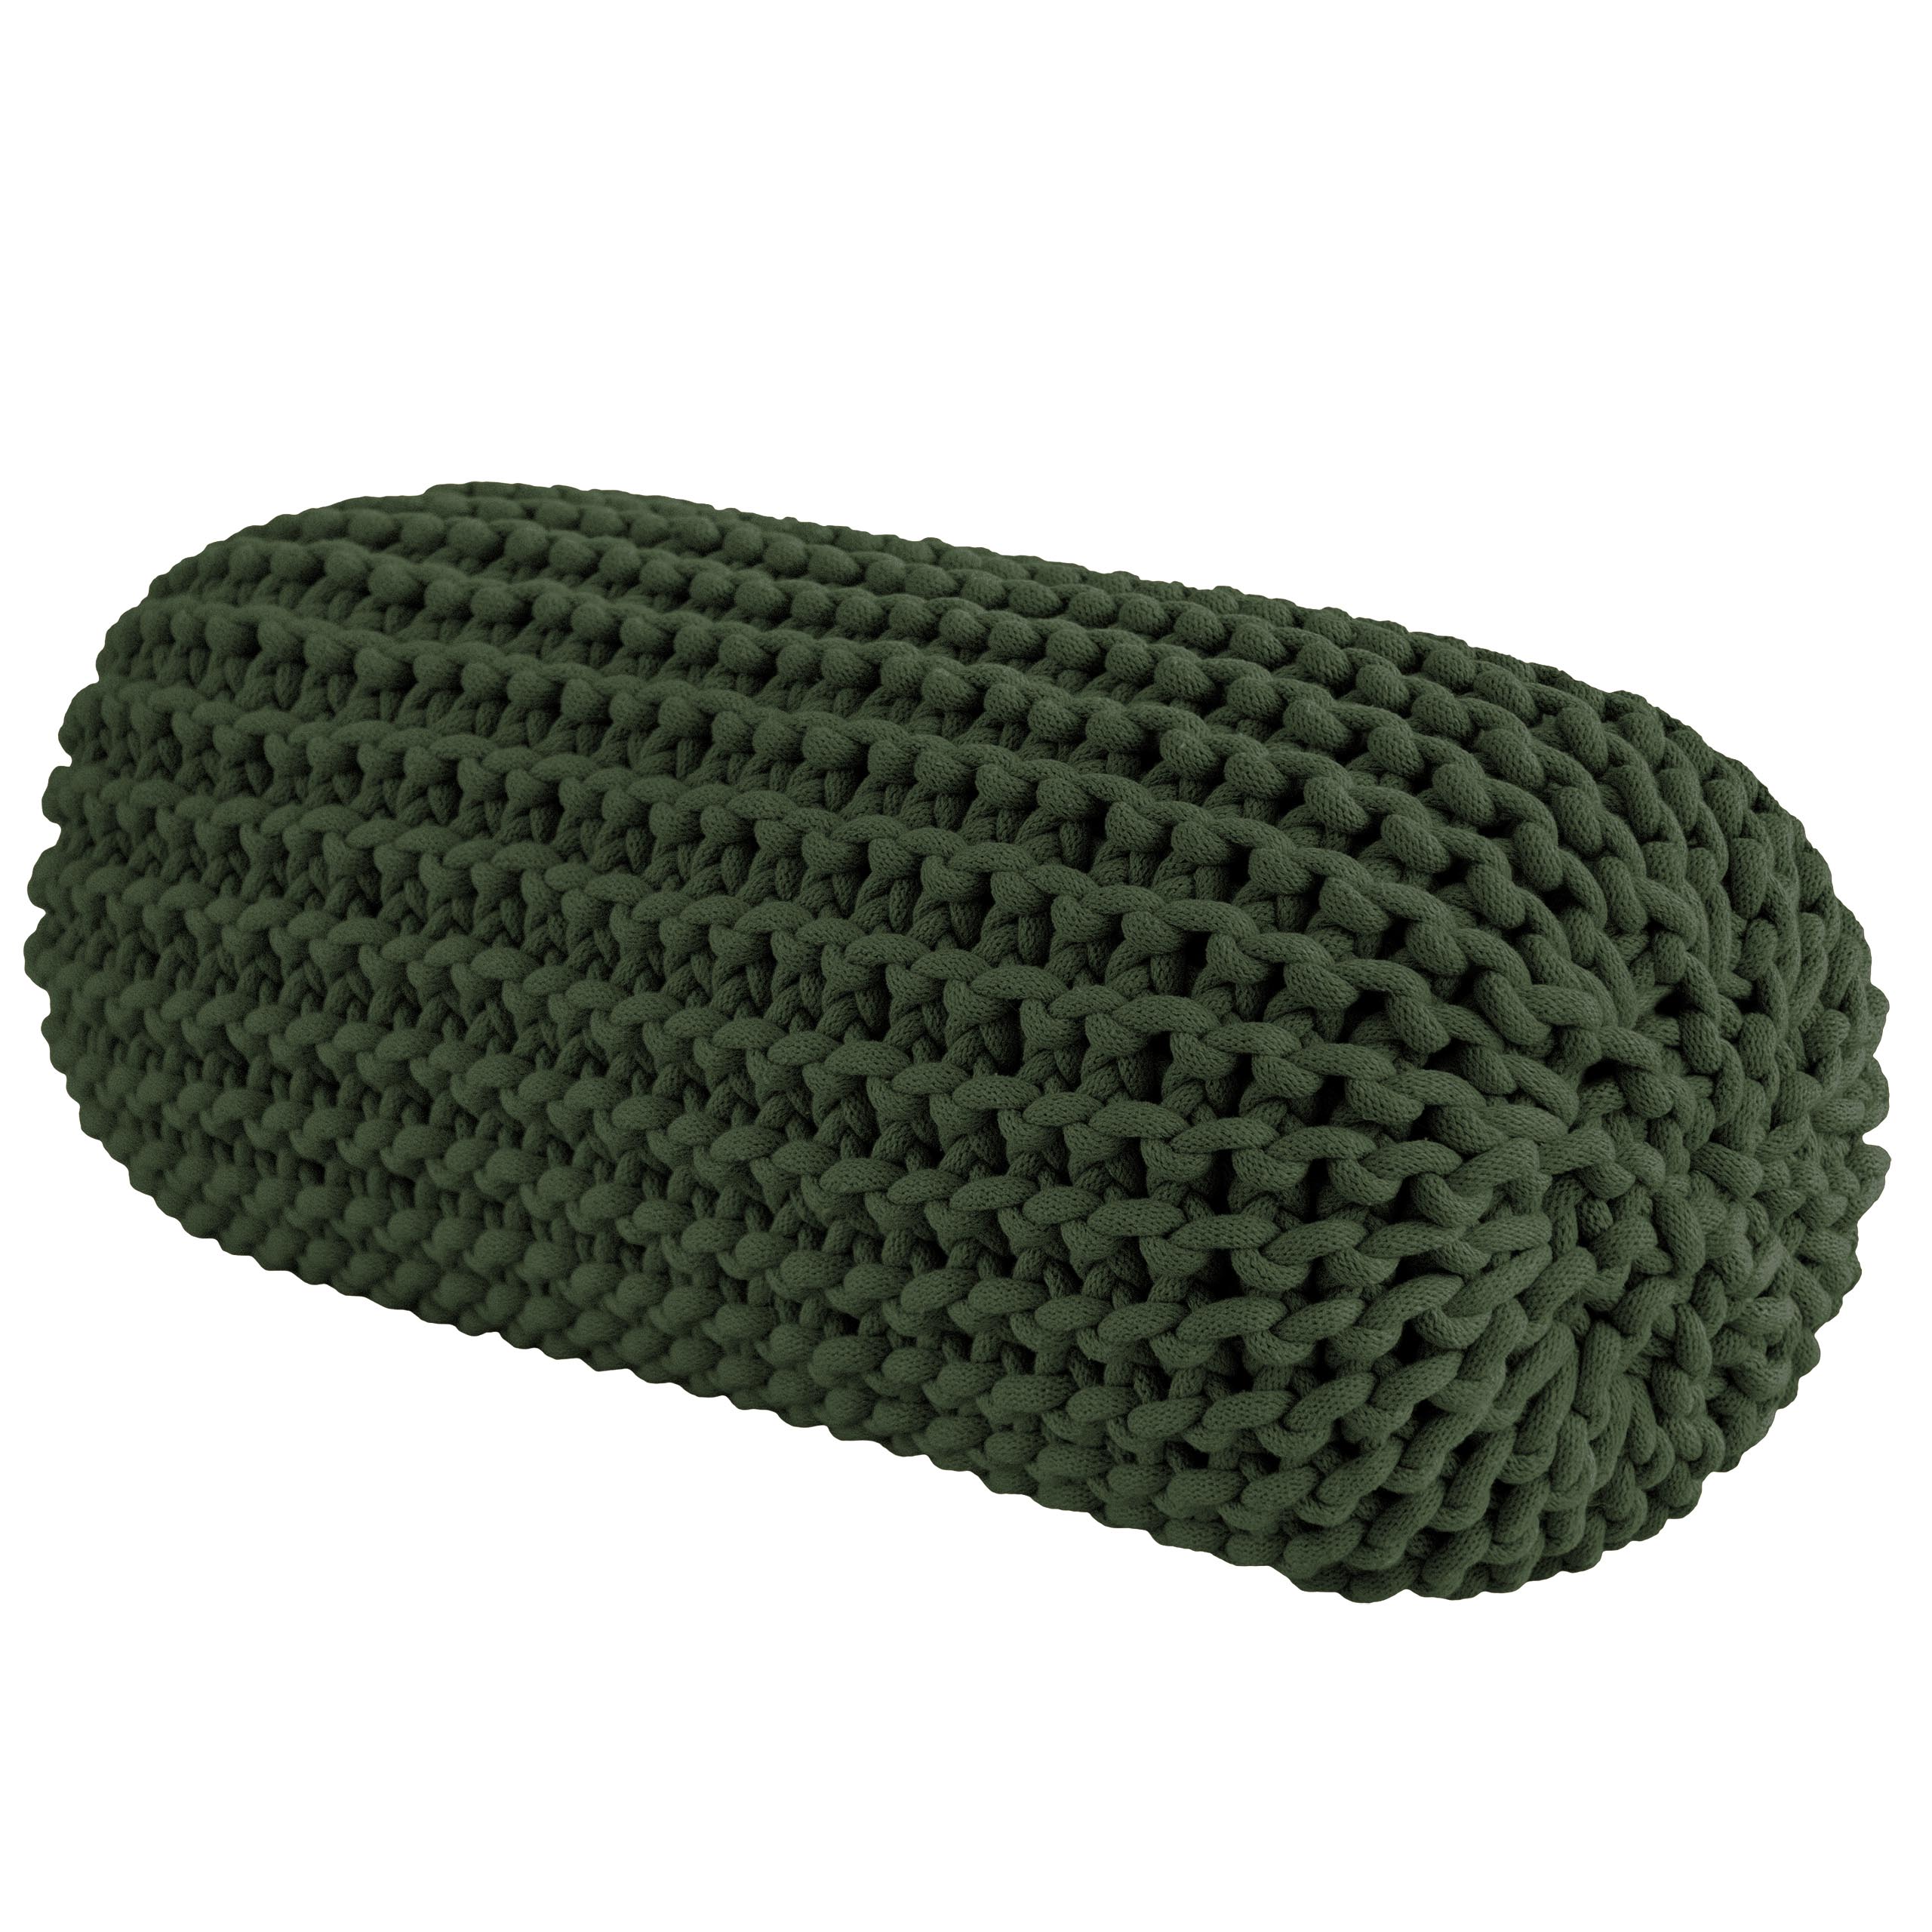 Zuri House Chunky Knitted Bolster Footrest | OLIVE GREEN - 60 x 25 cm (24 x 10 in)